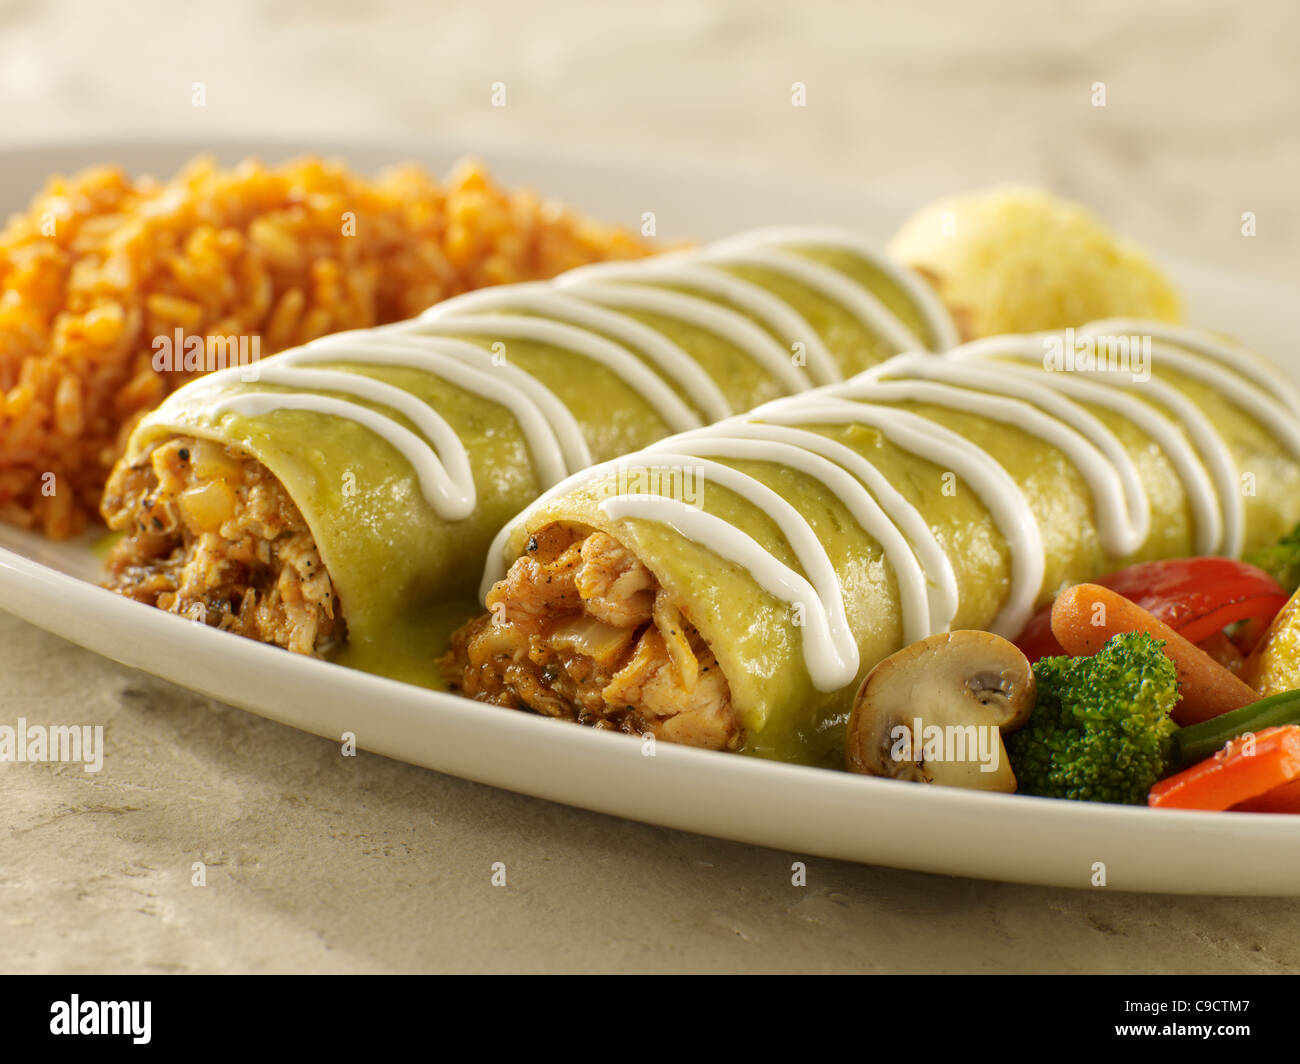 Chicken enchilada suiza with Spanish rice and vegetables Stock Photo